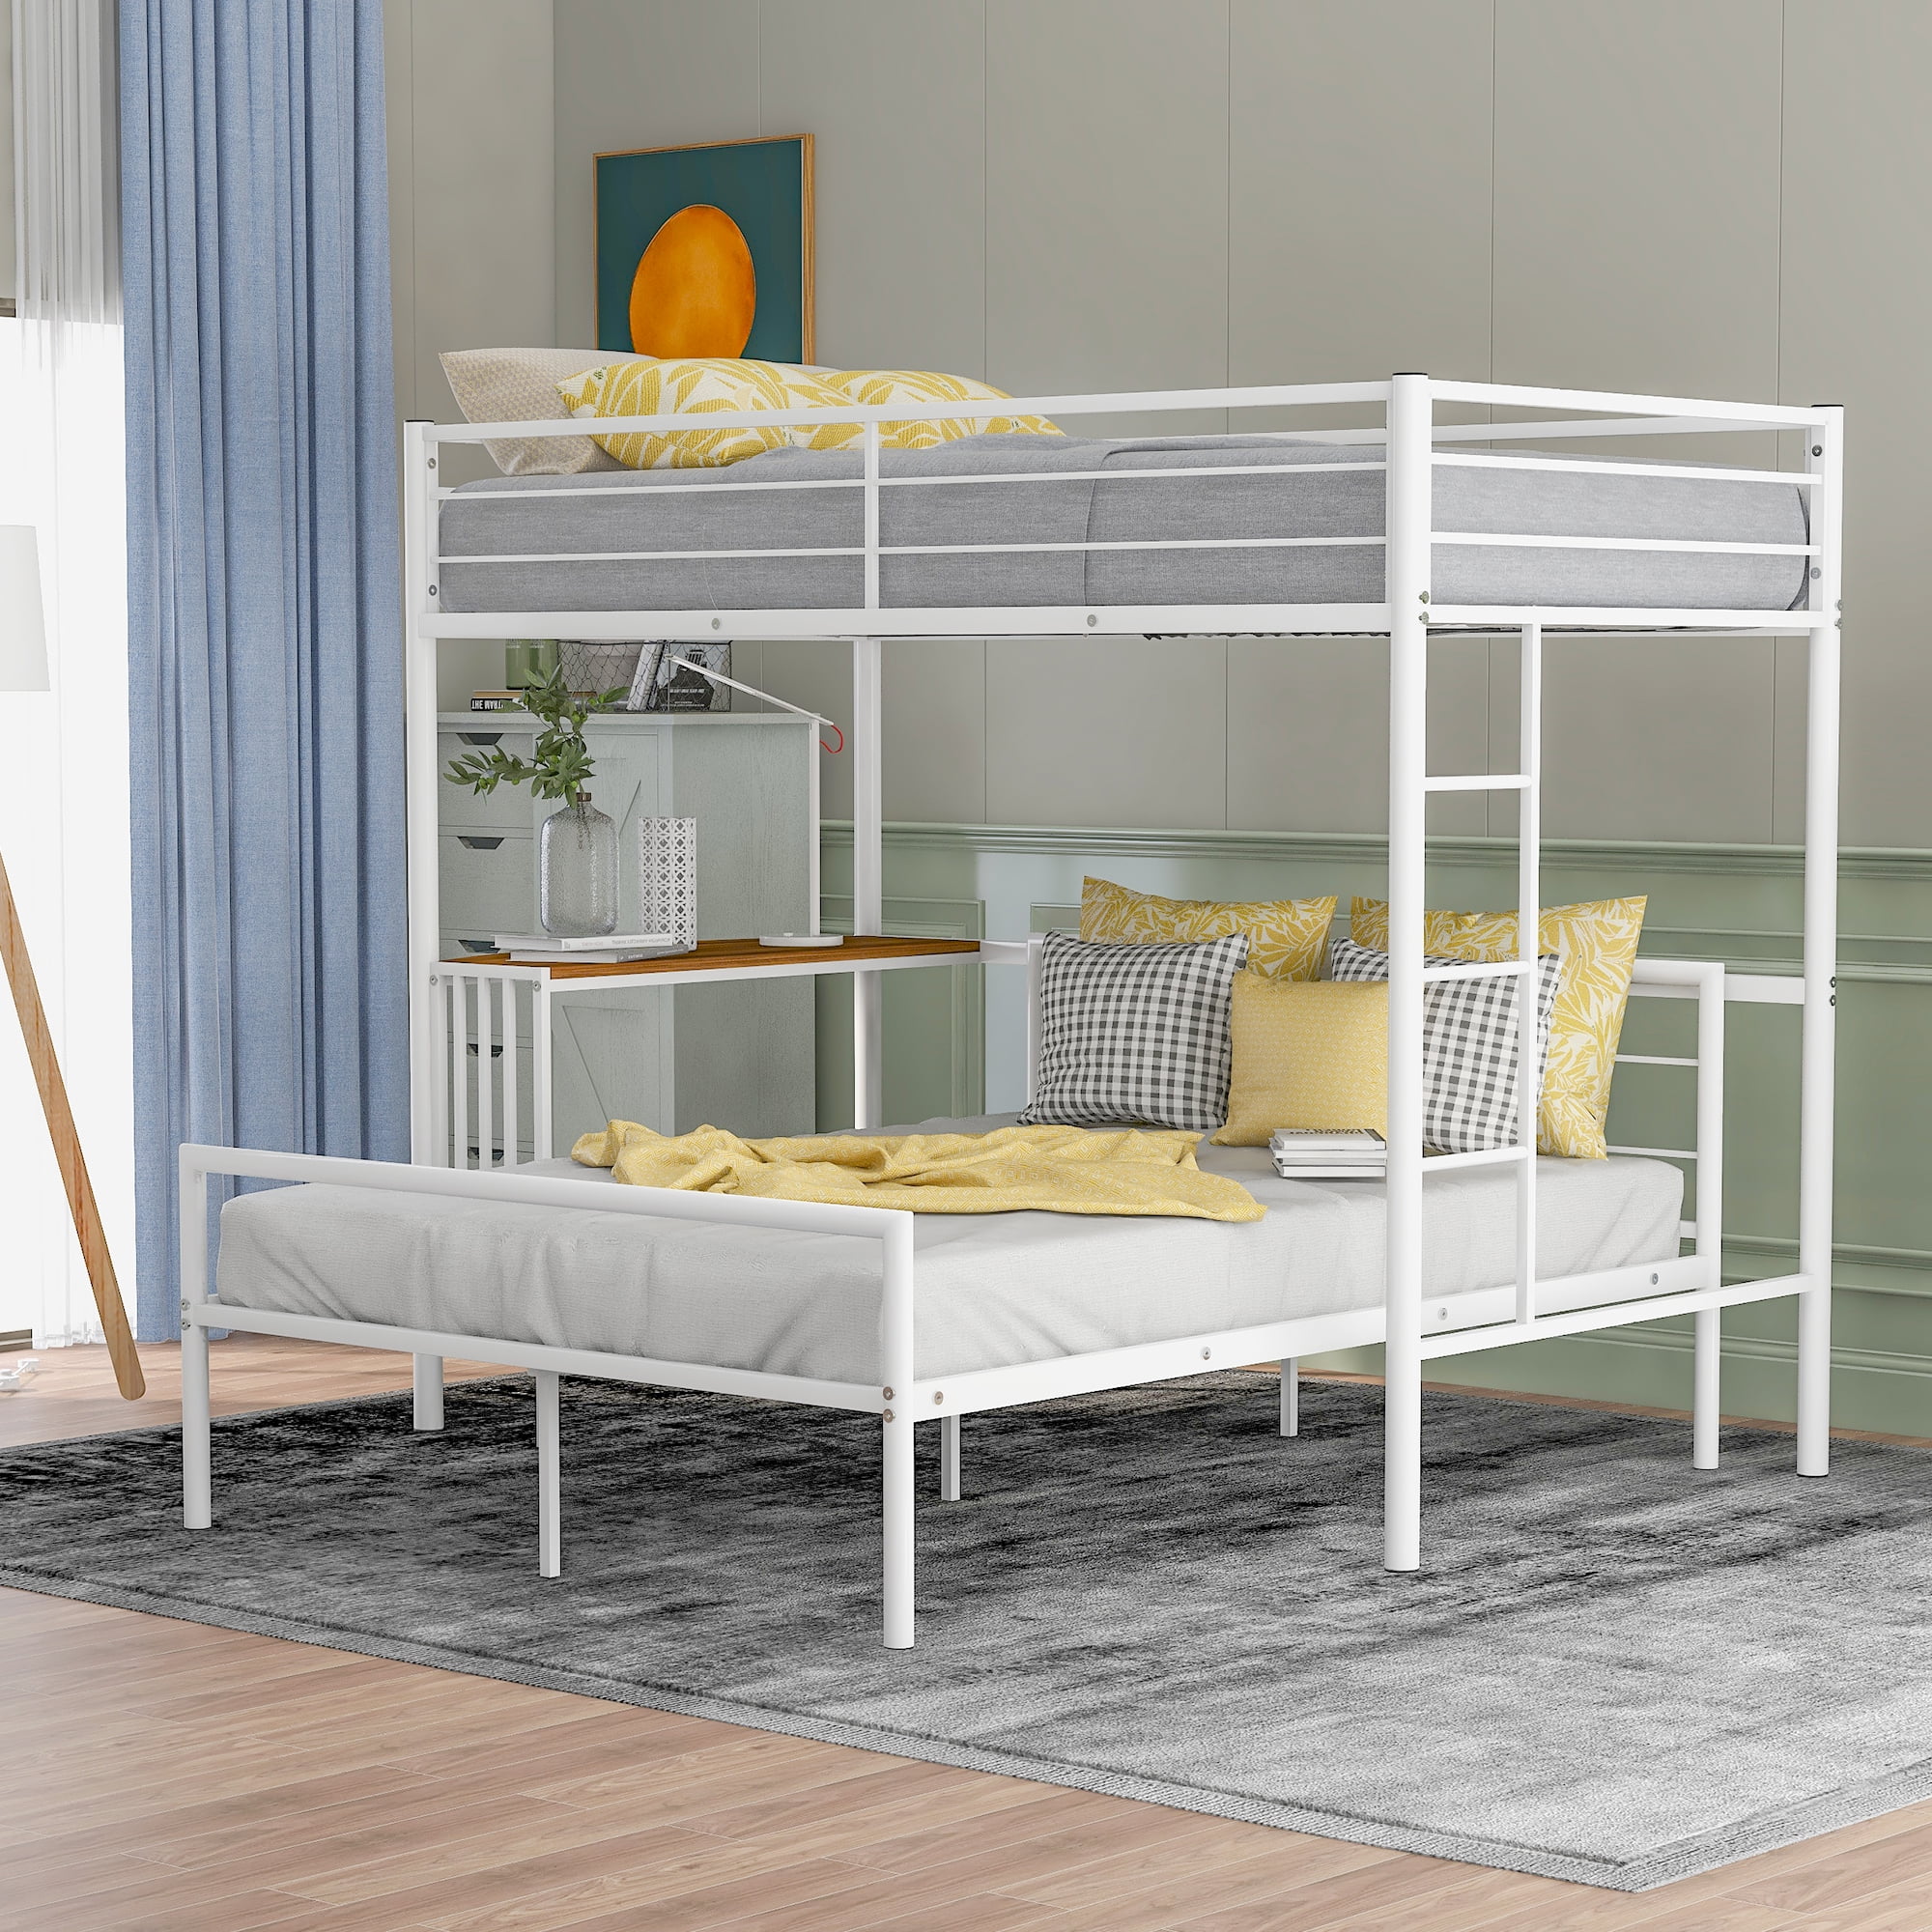 Full Bunk Bed Sy Metal, Bunk Beds That Separate Into Twin Beds